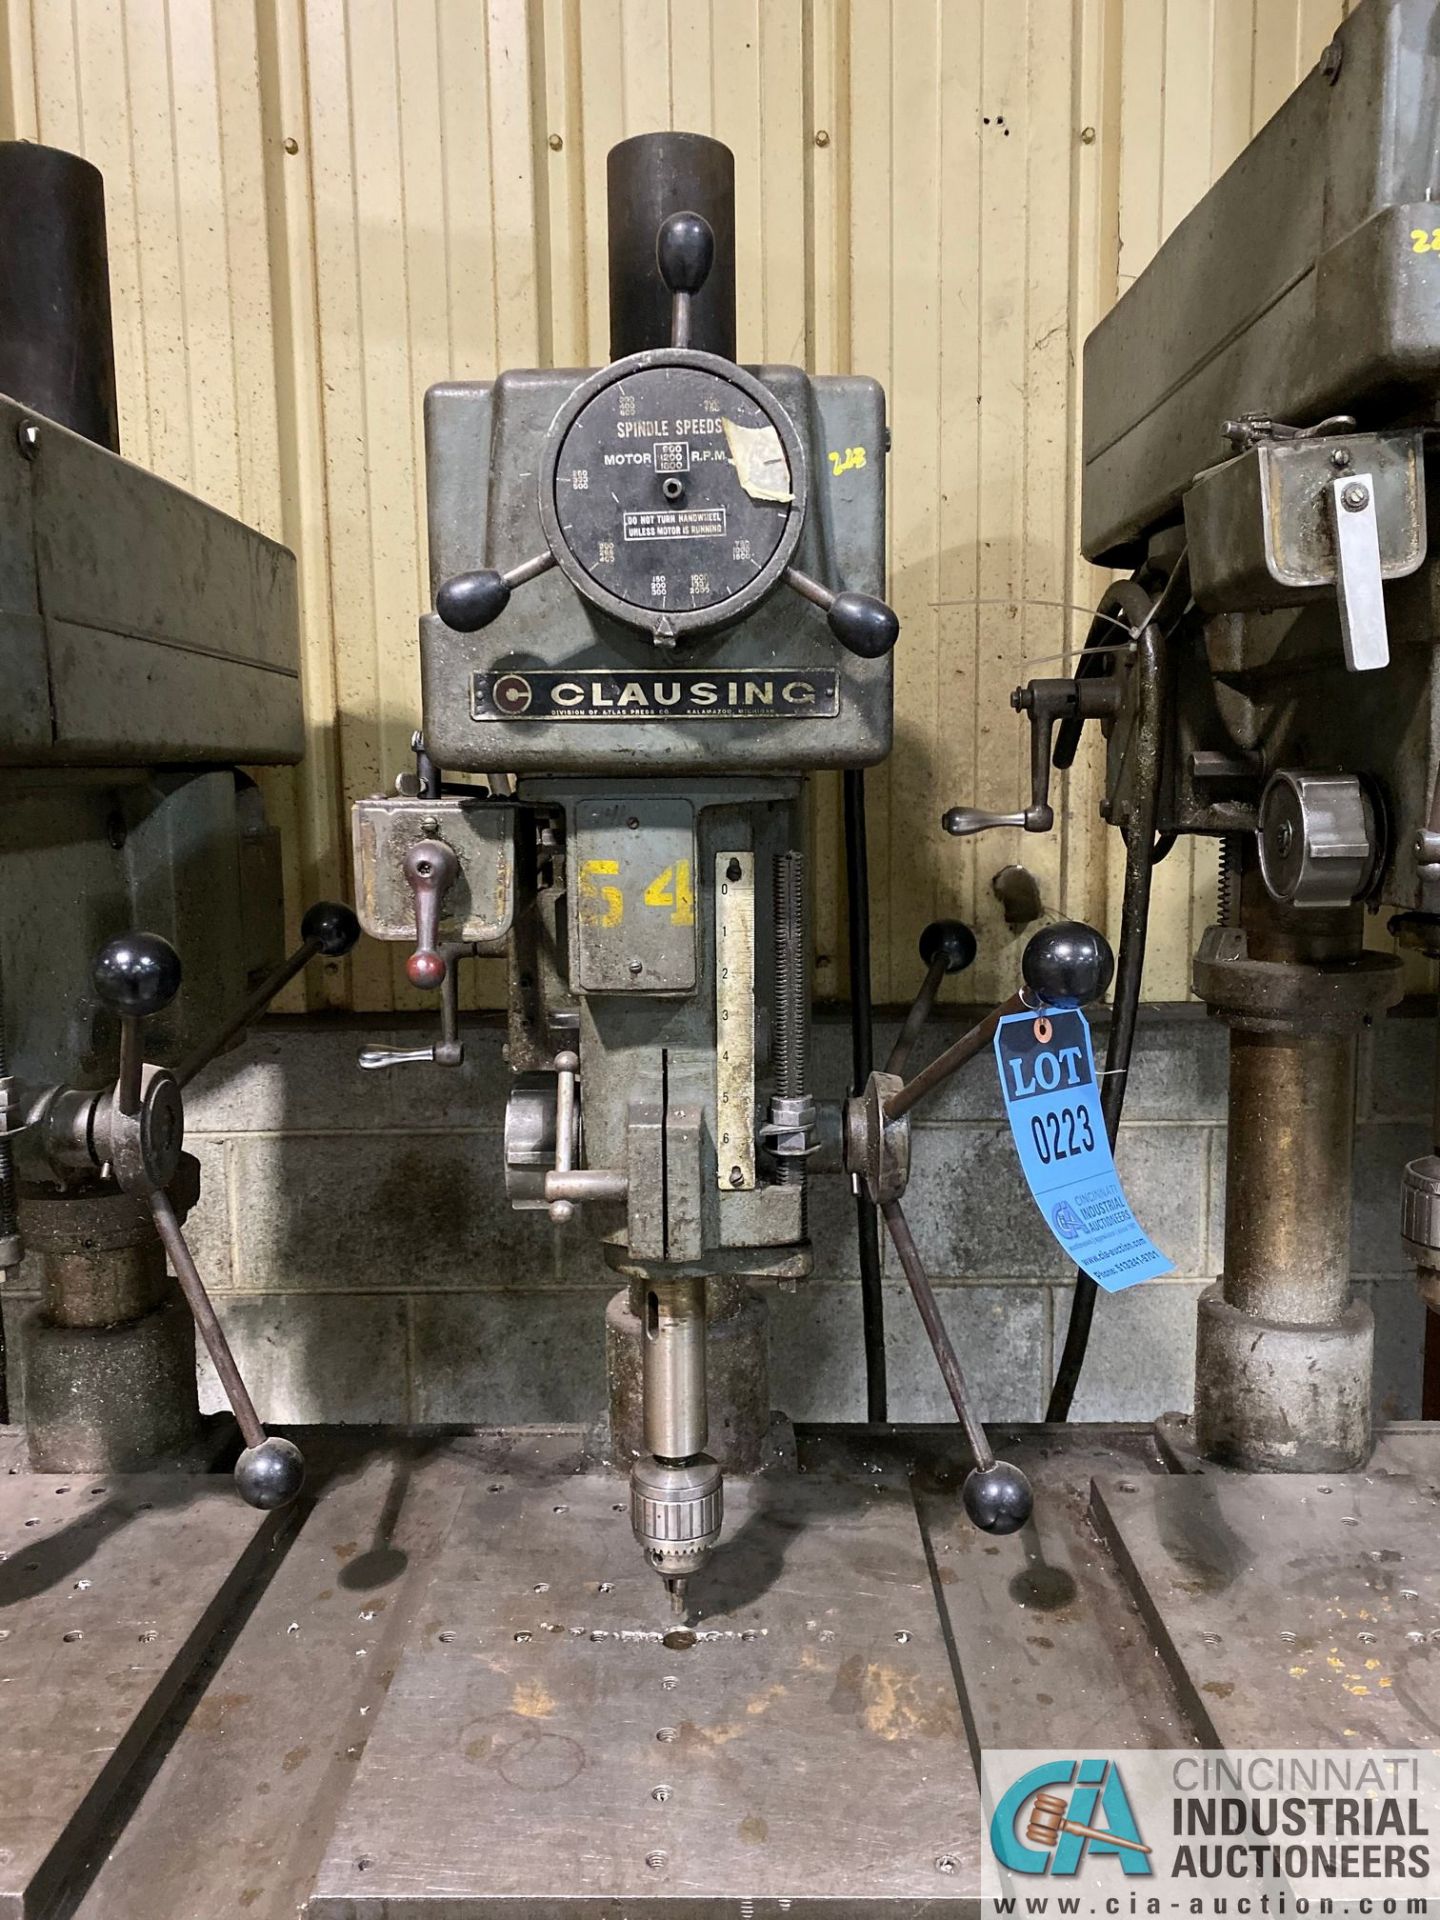 18" - 20" 4-HEAD CLAUSING DRILL PRESS, SPINDLE SPEED 150-2000 RPM - Image 6 of 7